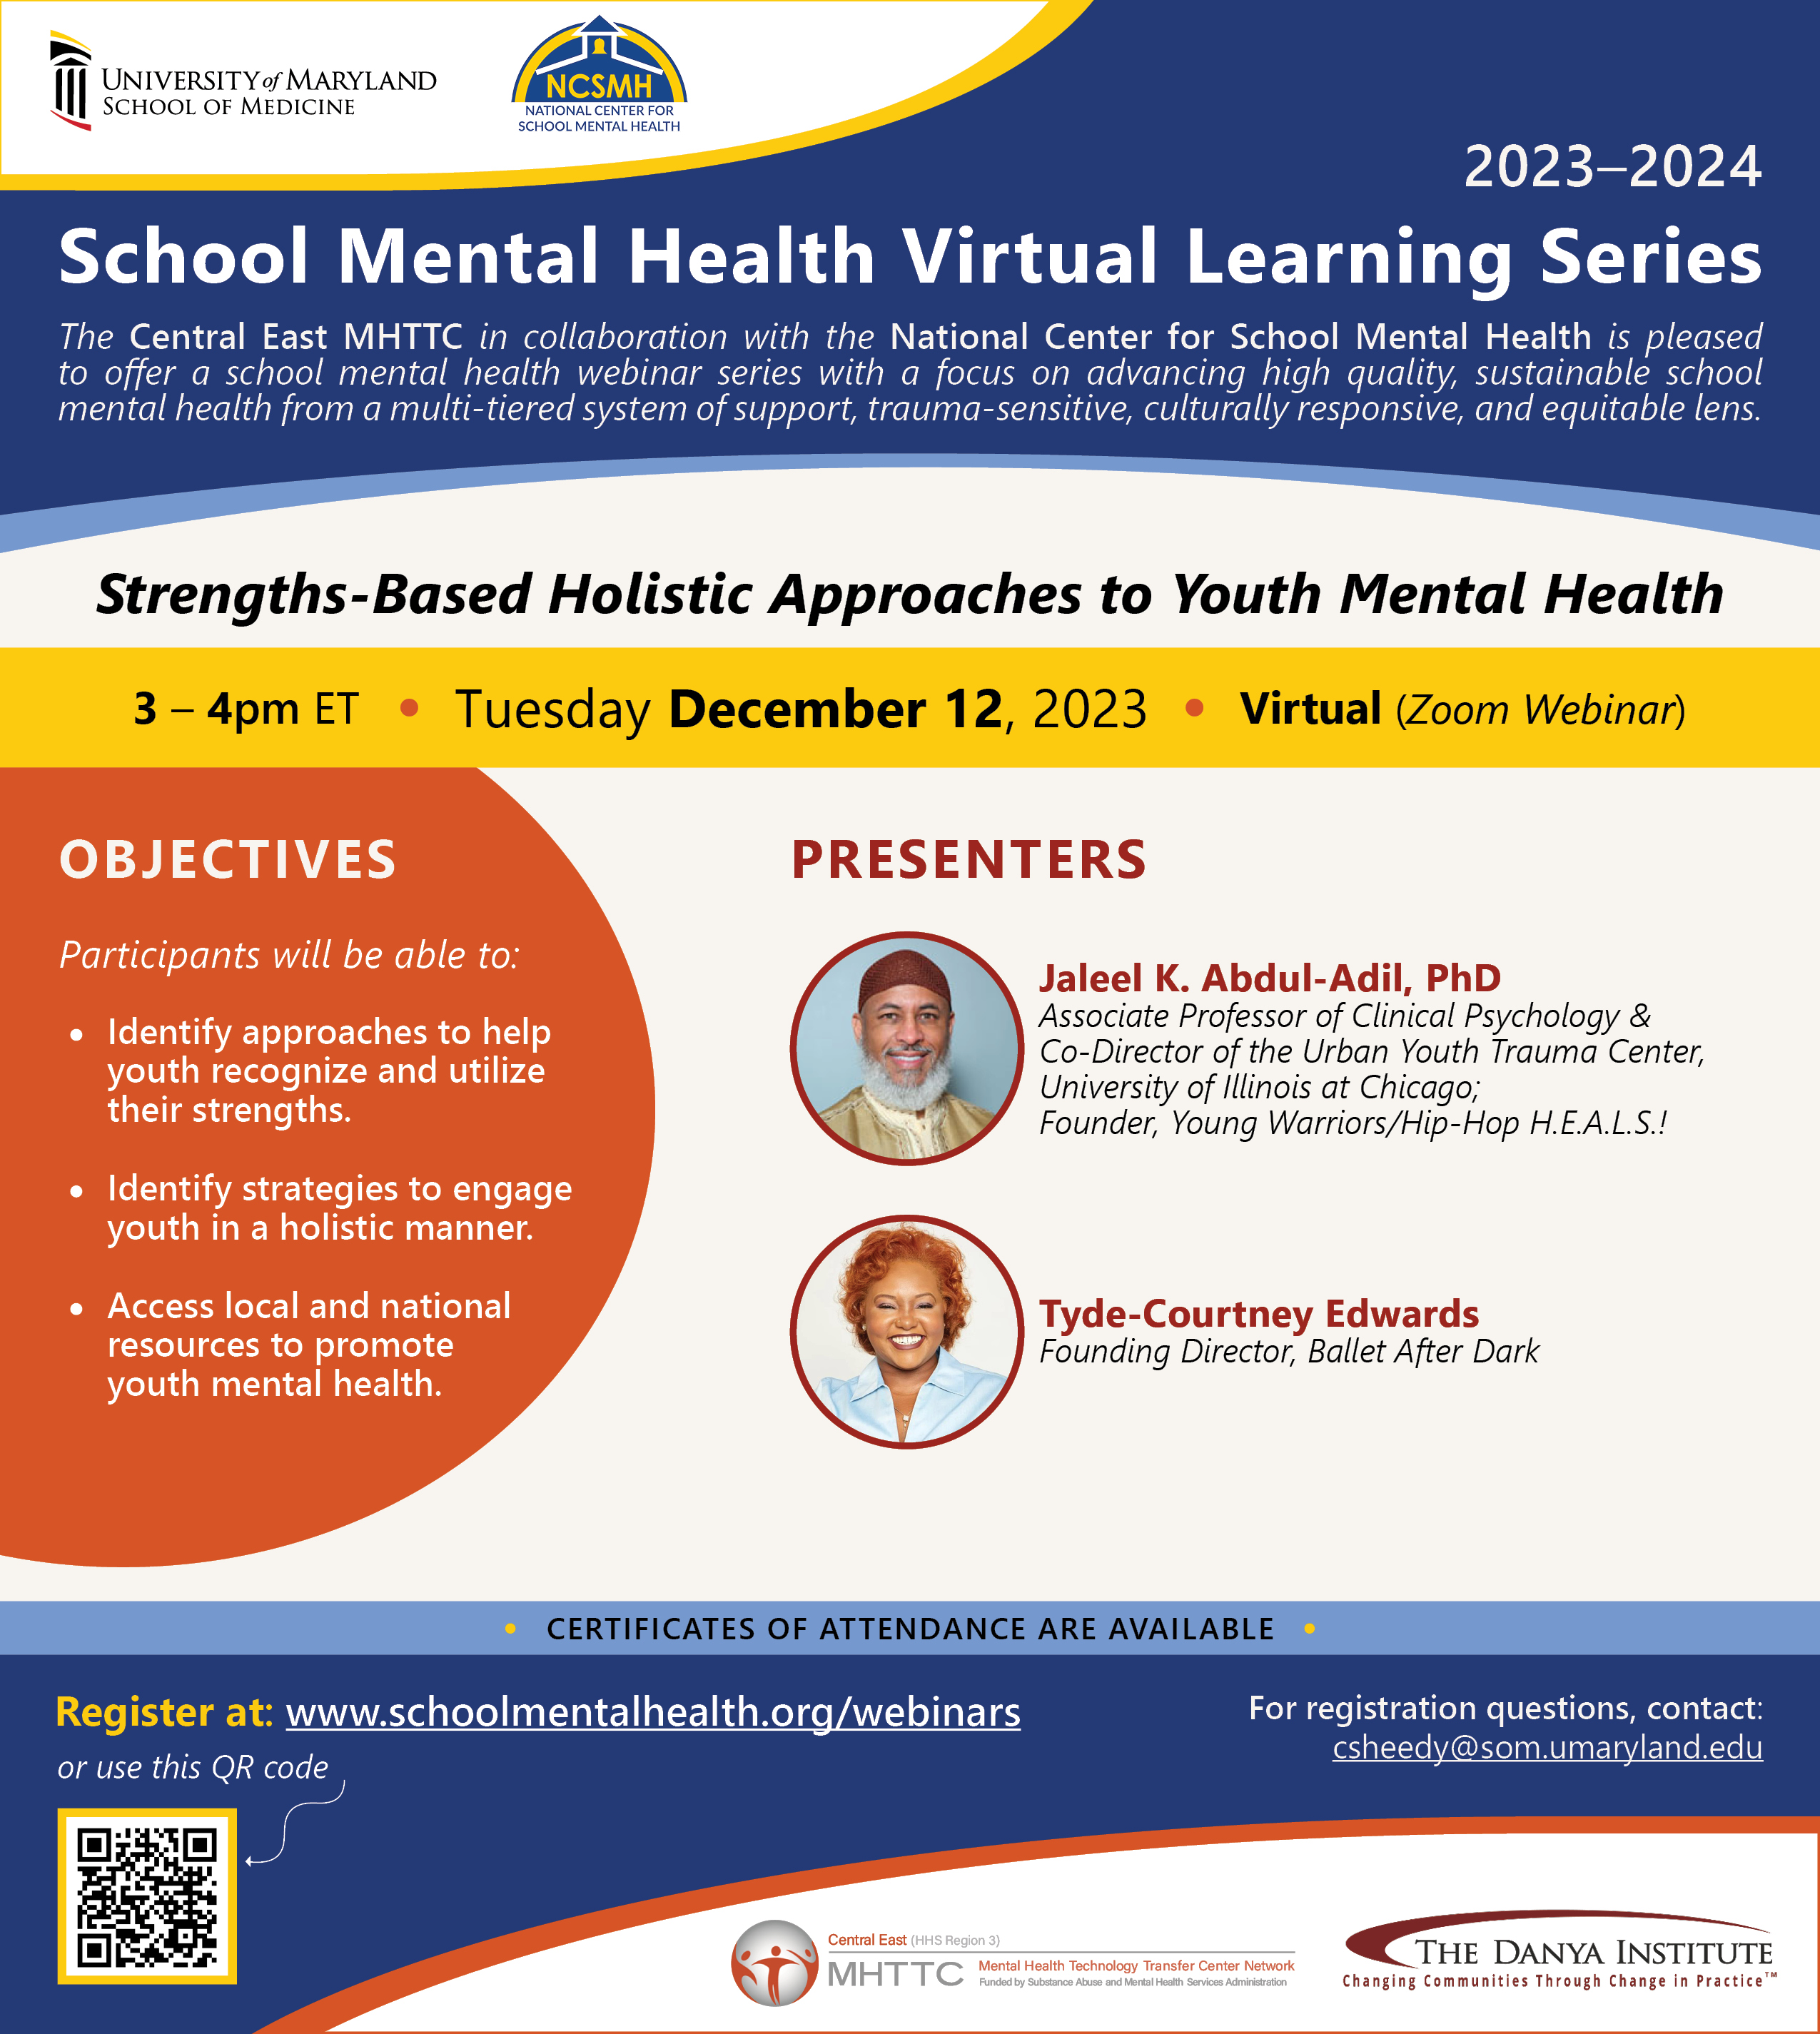 2024 Promoting School Well-Being Learning Community. Strengths-based Holistic Approaches to Youth Mental Health. 3-4pm ET, Tuesday December 12, 2023, Virtual (Zoom webinar). Presenters: Jaleel K. Abudul-Adil, PhD, Tyde-Courtney Edwards.